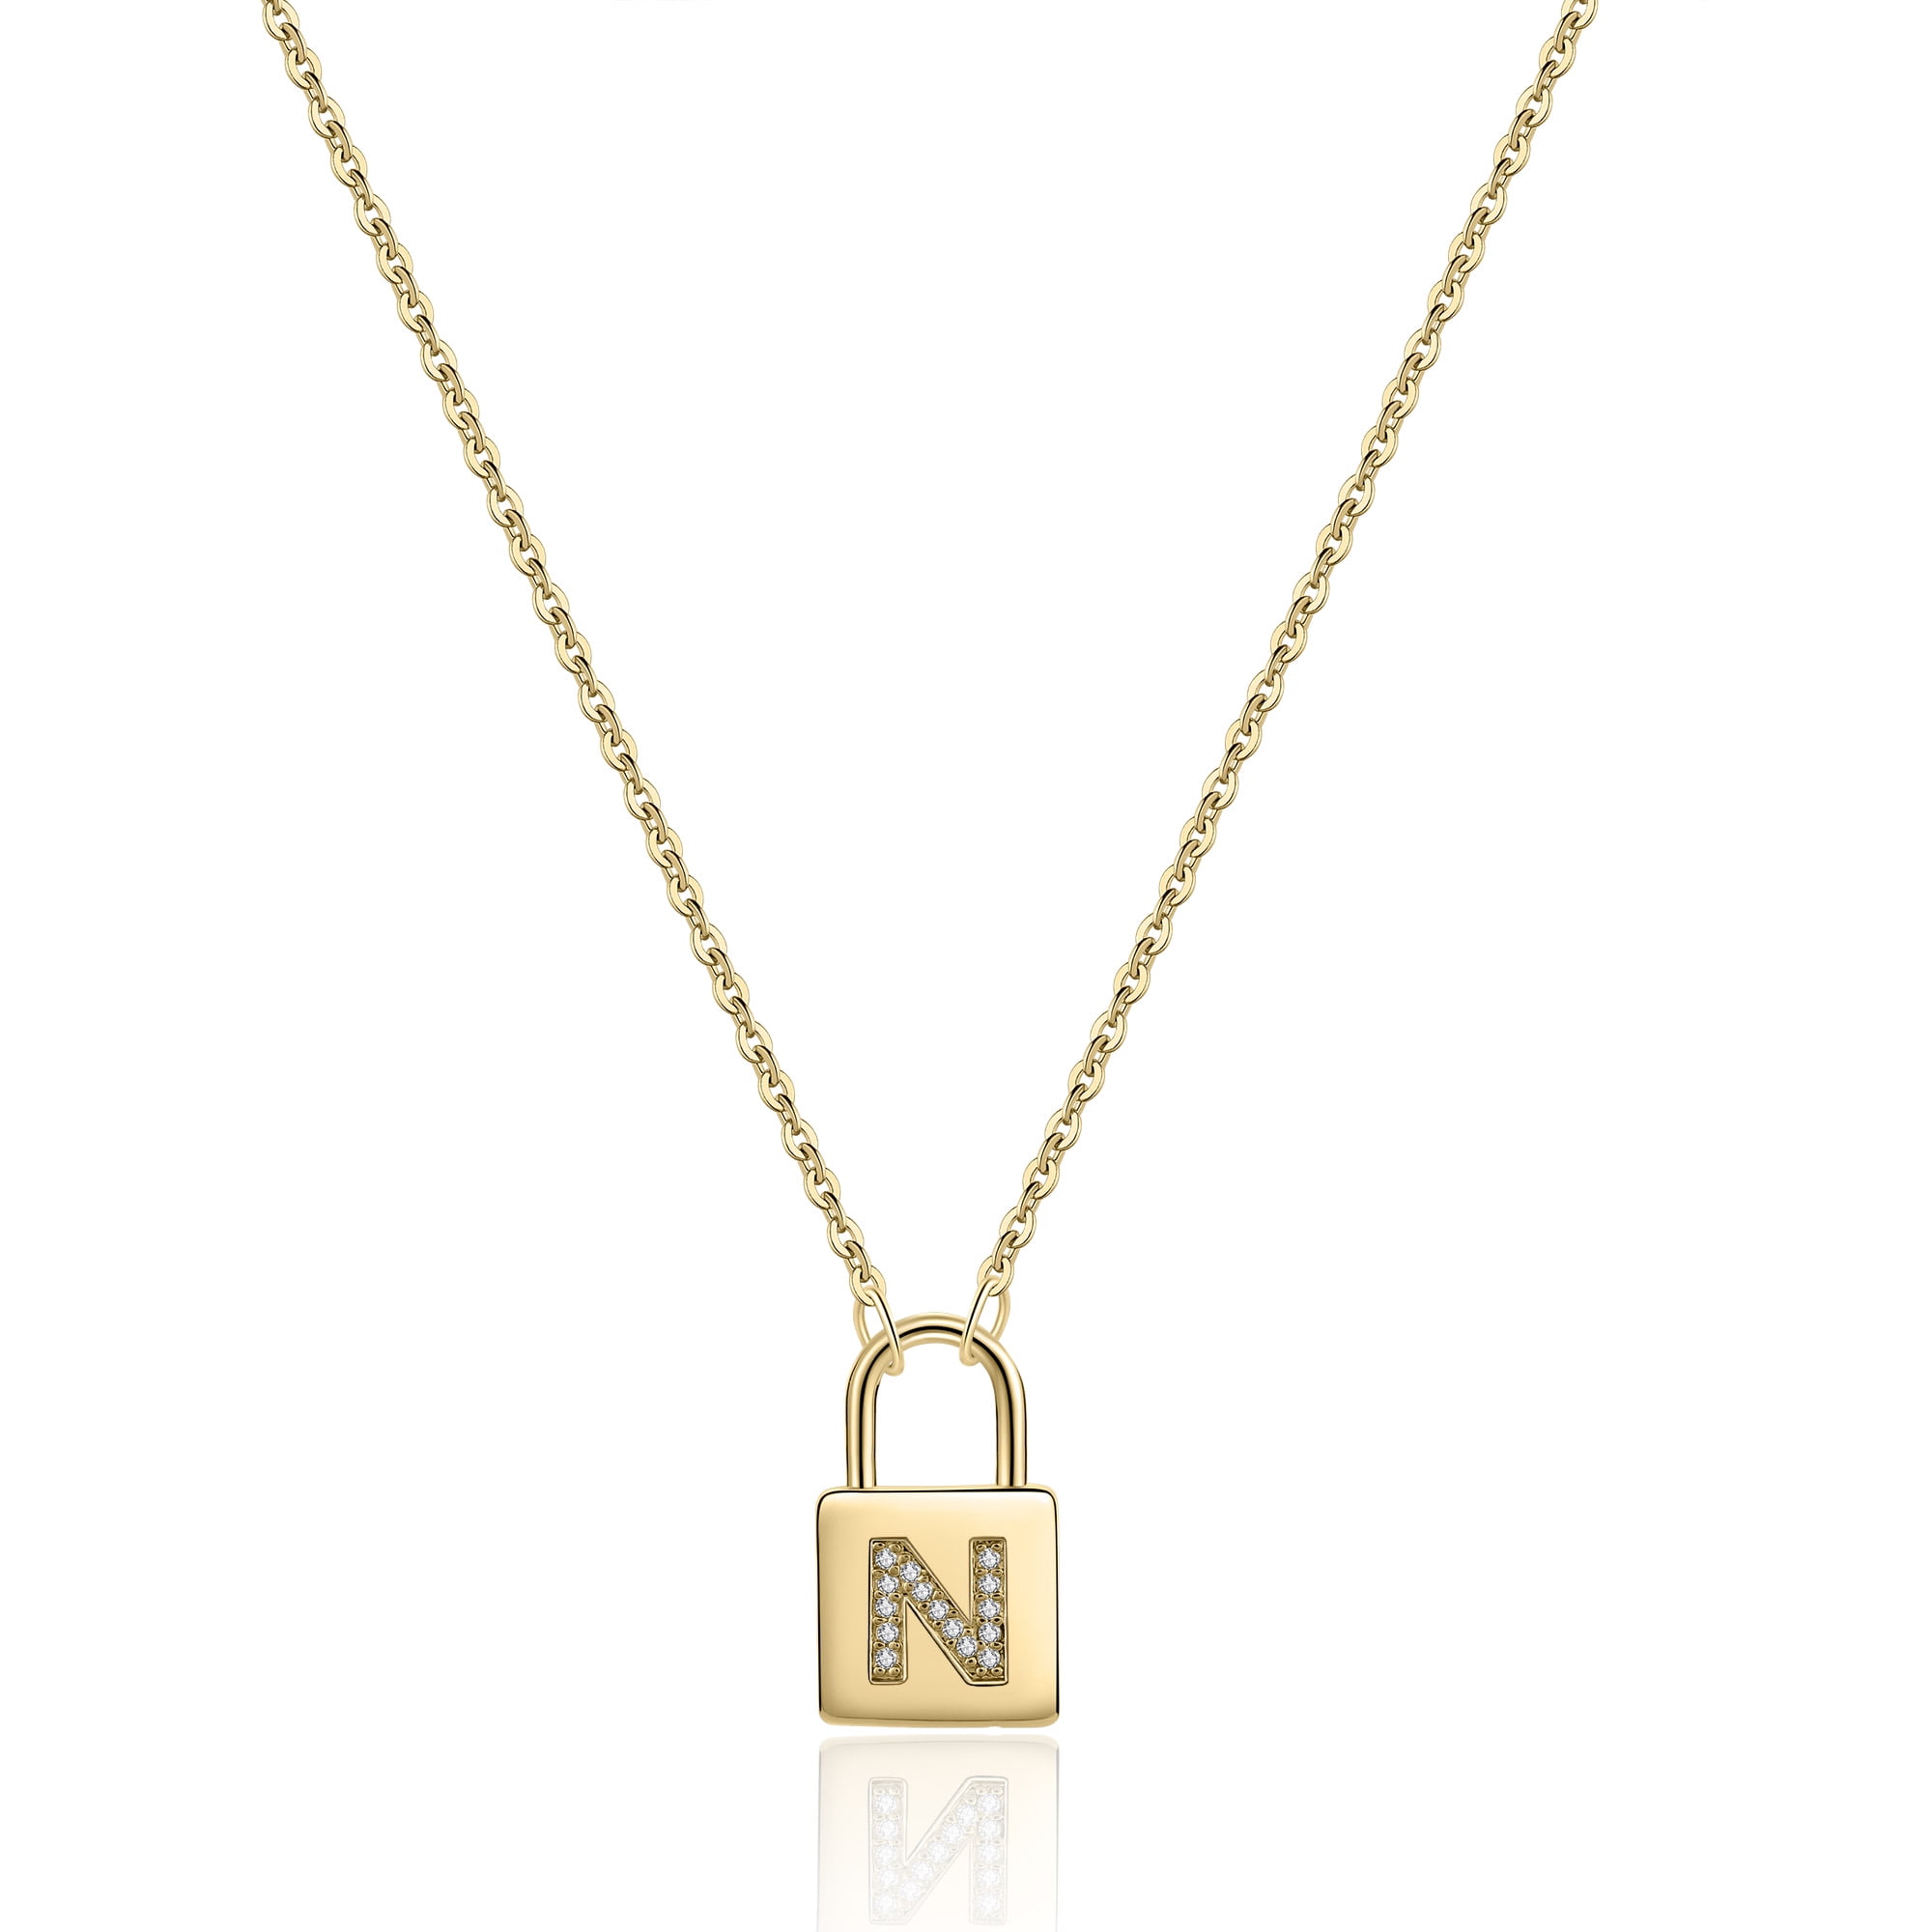 Silver Gold Initial Letter Alphabet Lock Pendant Chain Friendship Necklace  Gift | eBay